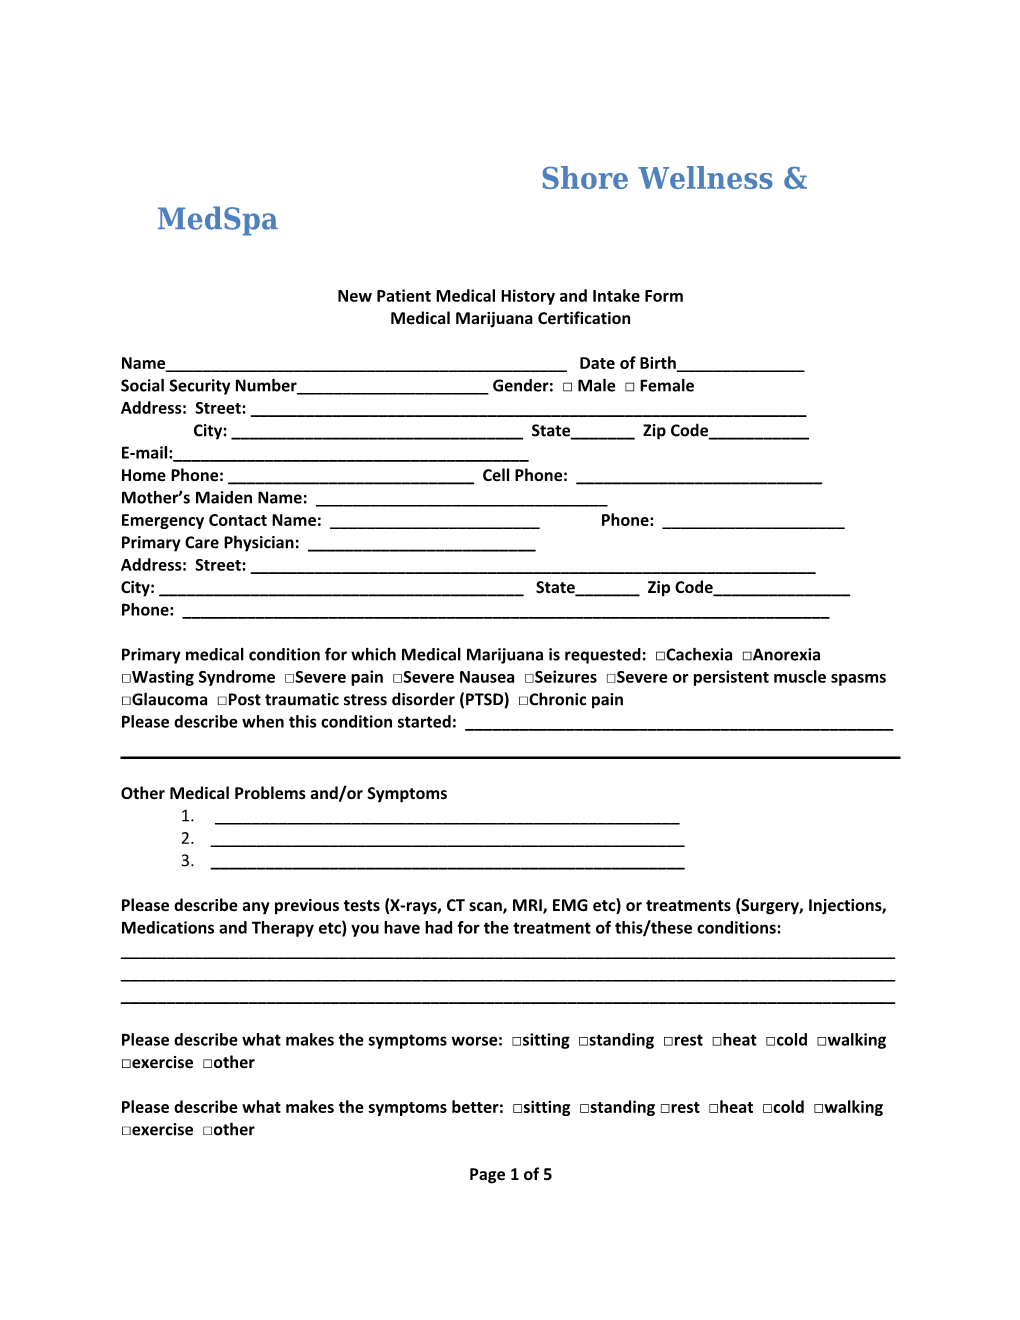 New Patient Medical History and Intake Form